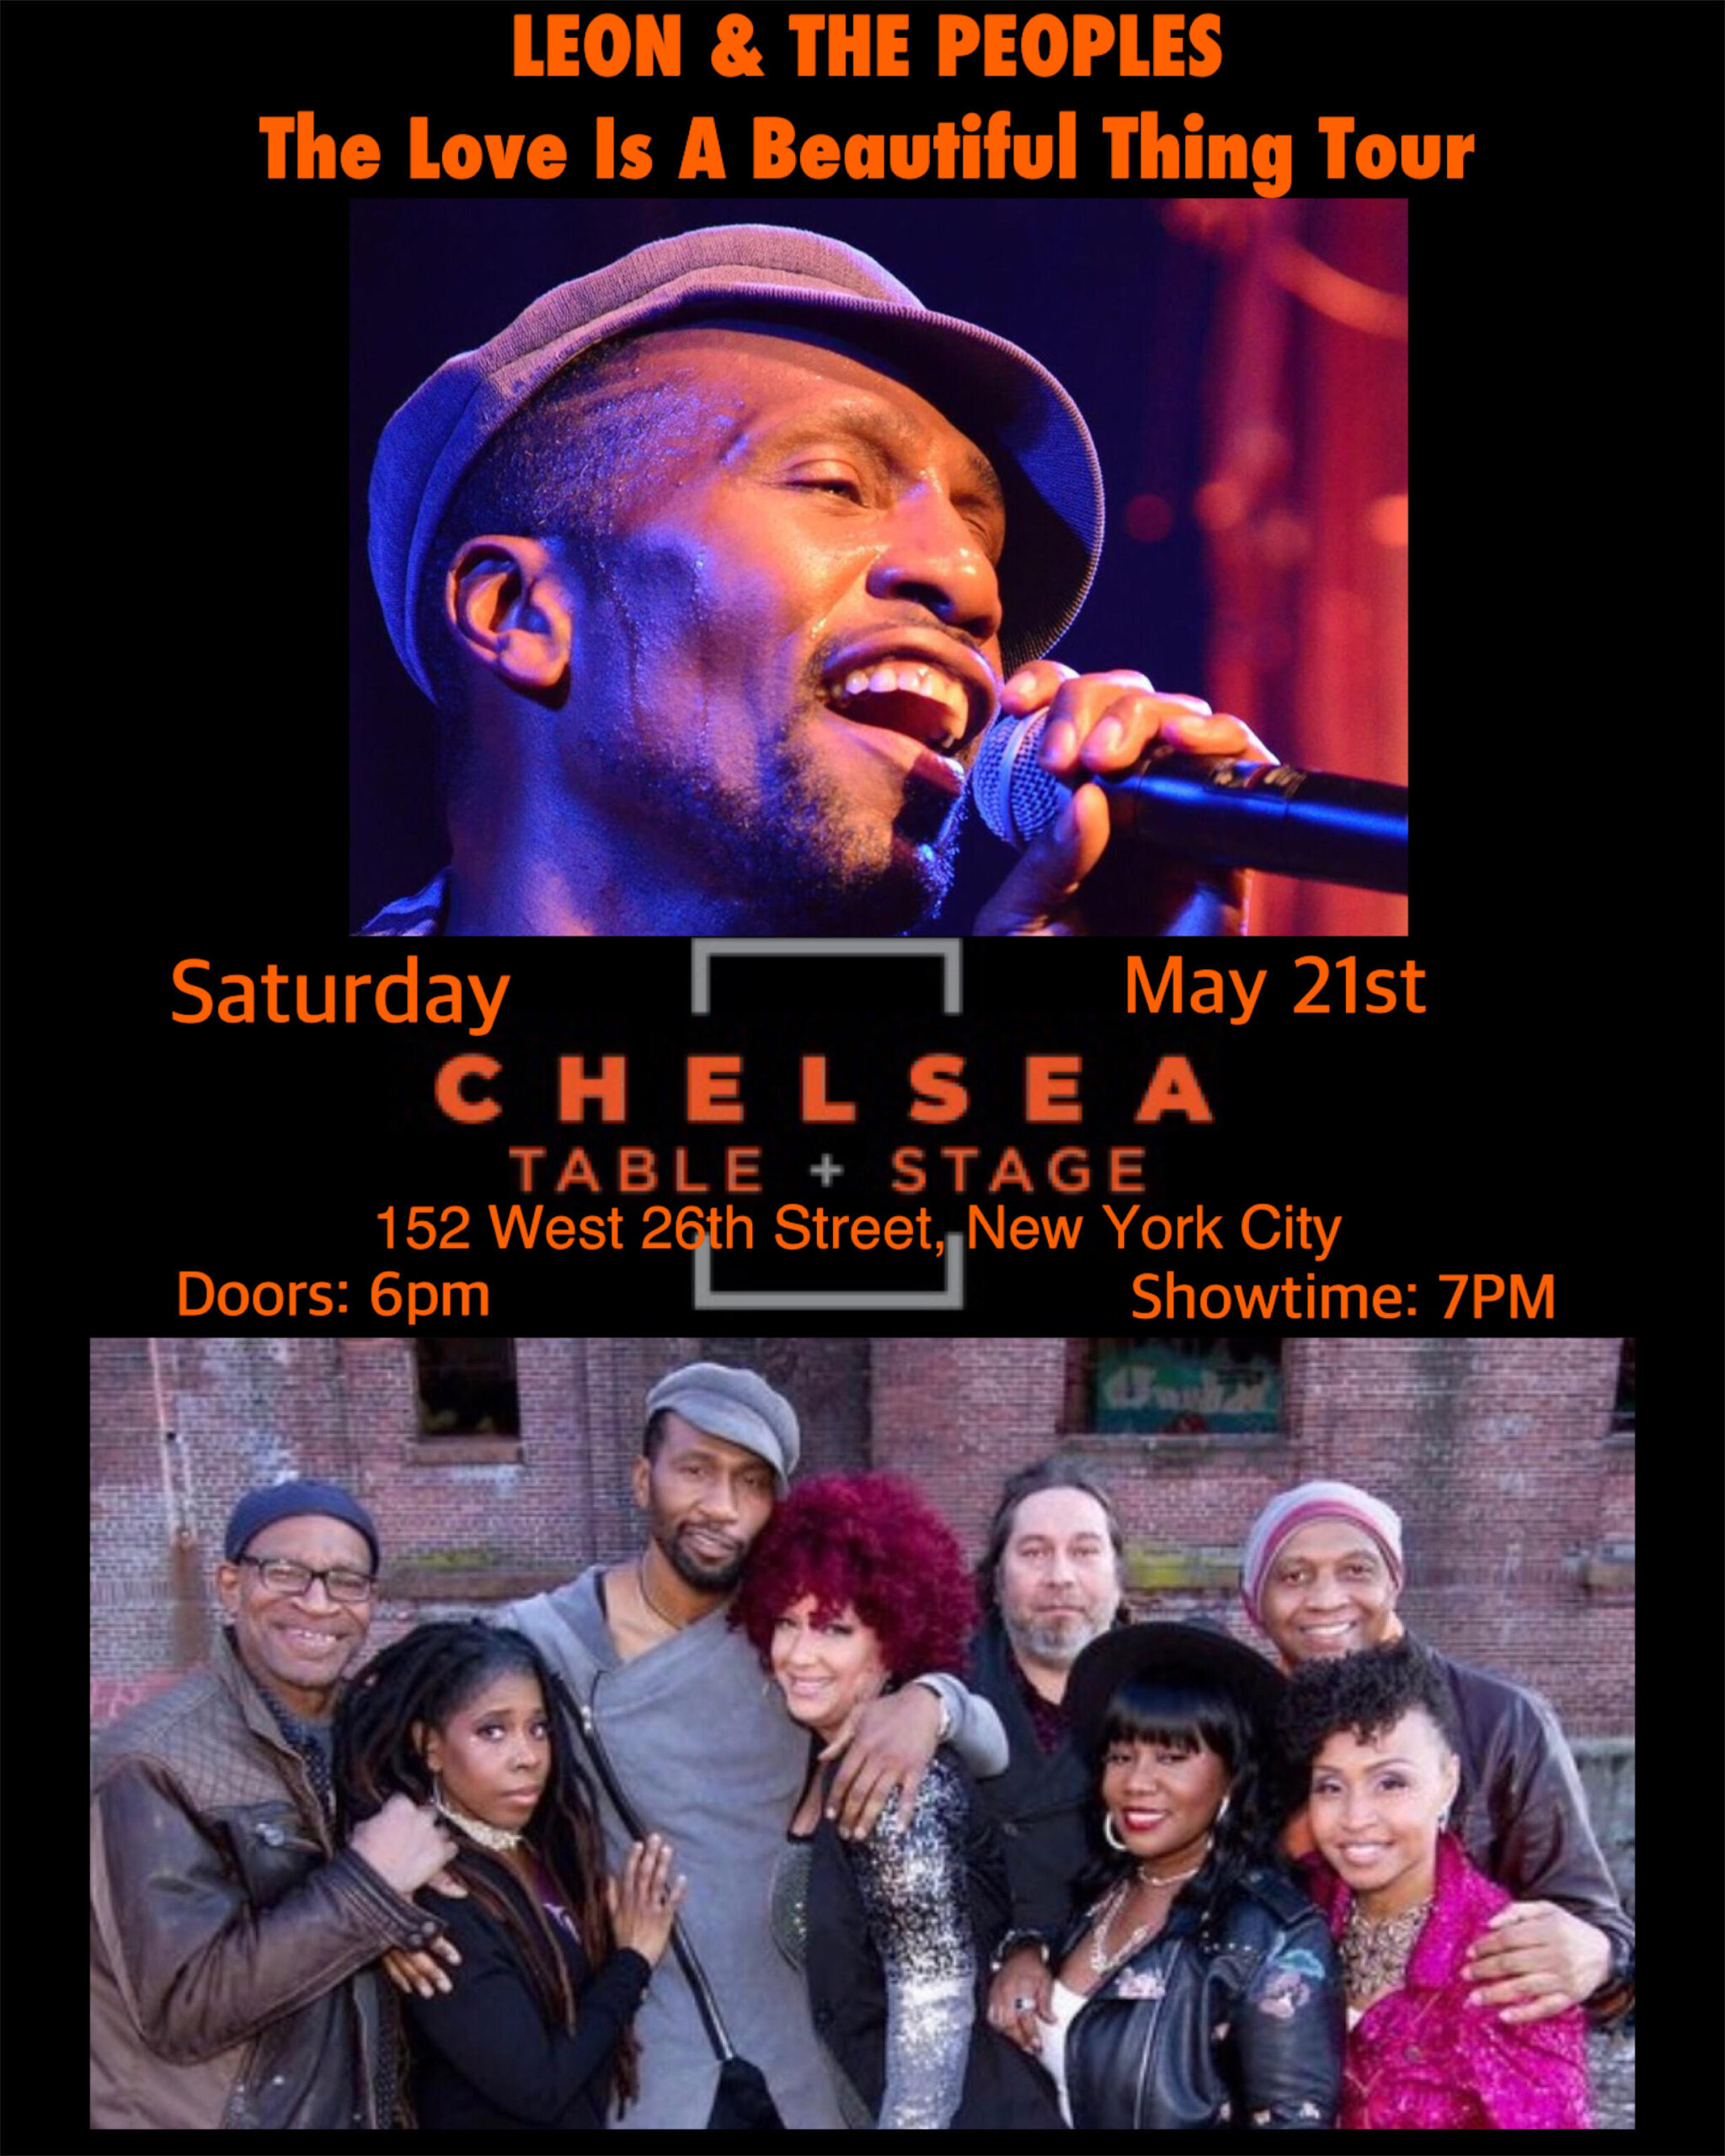 Chelsea Table & Stage – May 21st @ 7:00pm